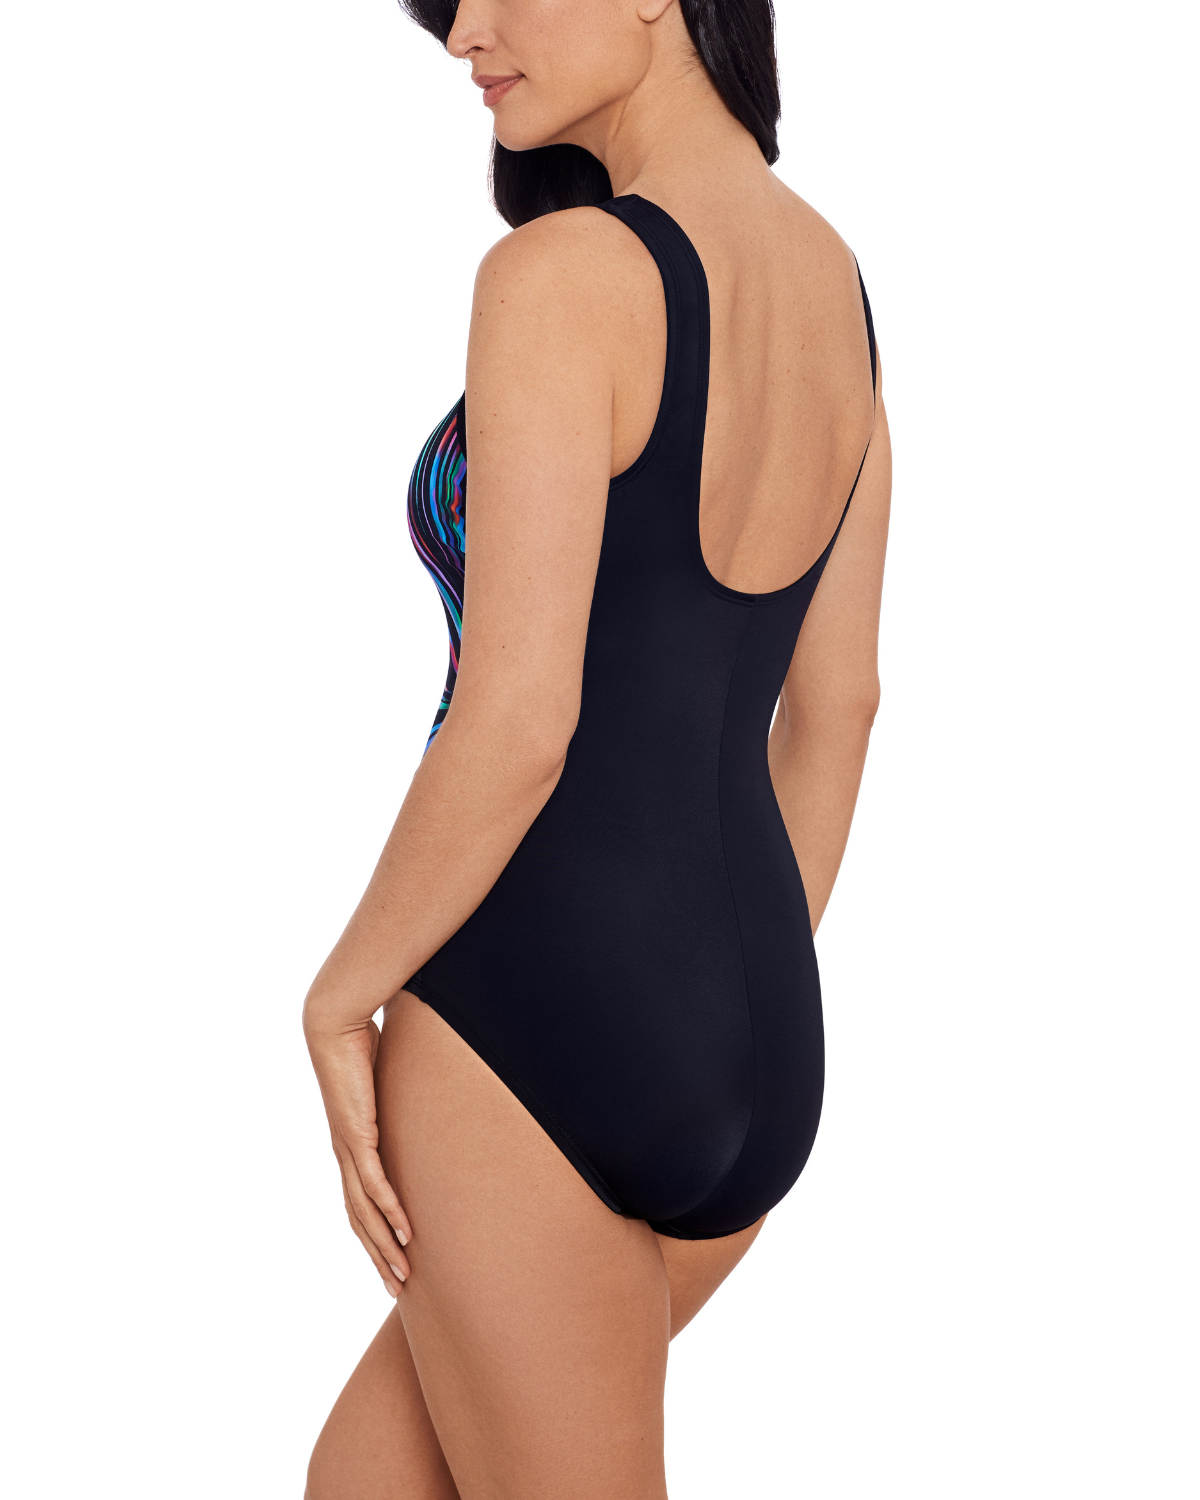 Model wearing a one piece swimsuit in black with blue abstract streaks and a scoop back.